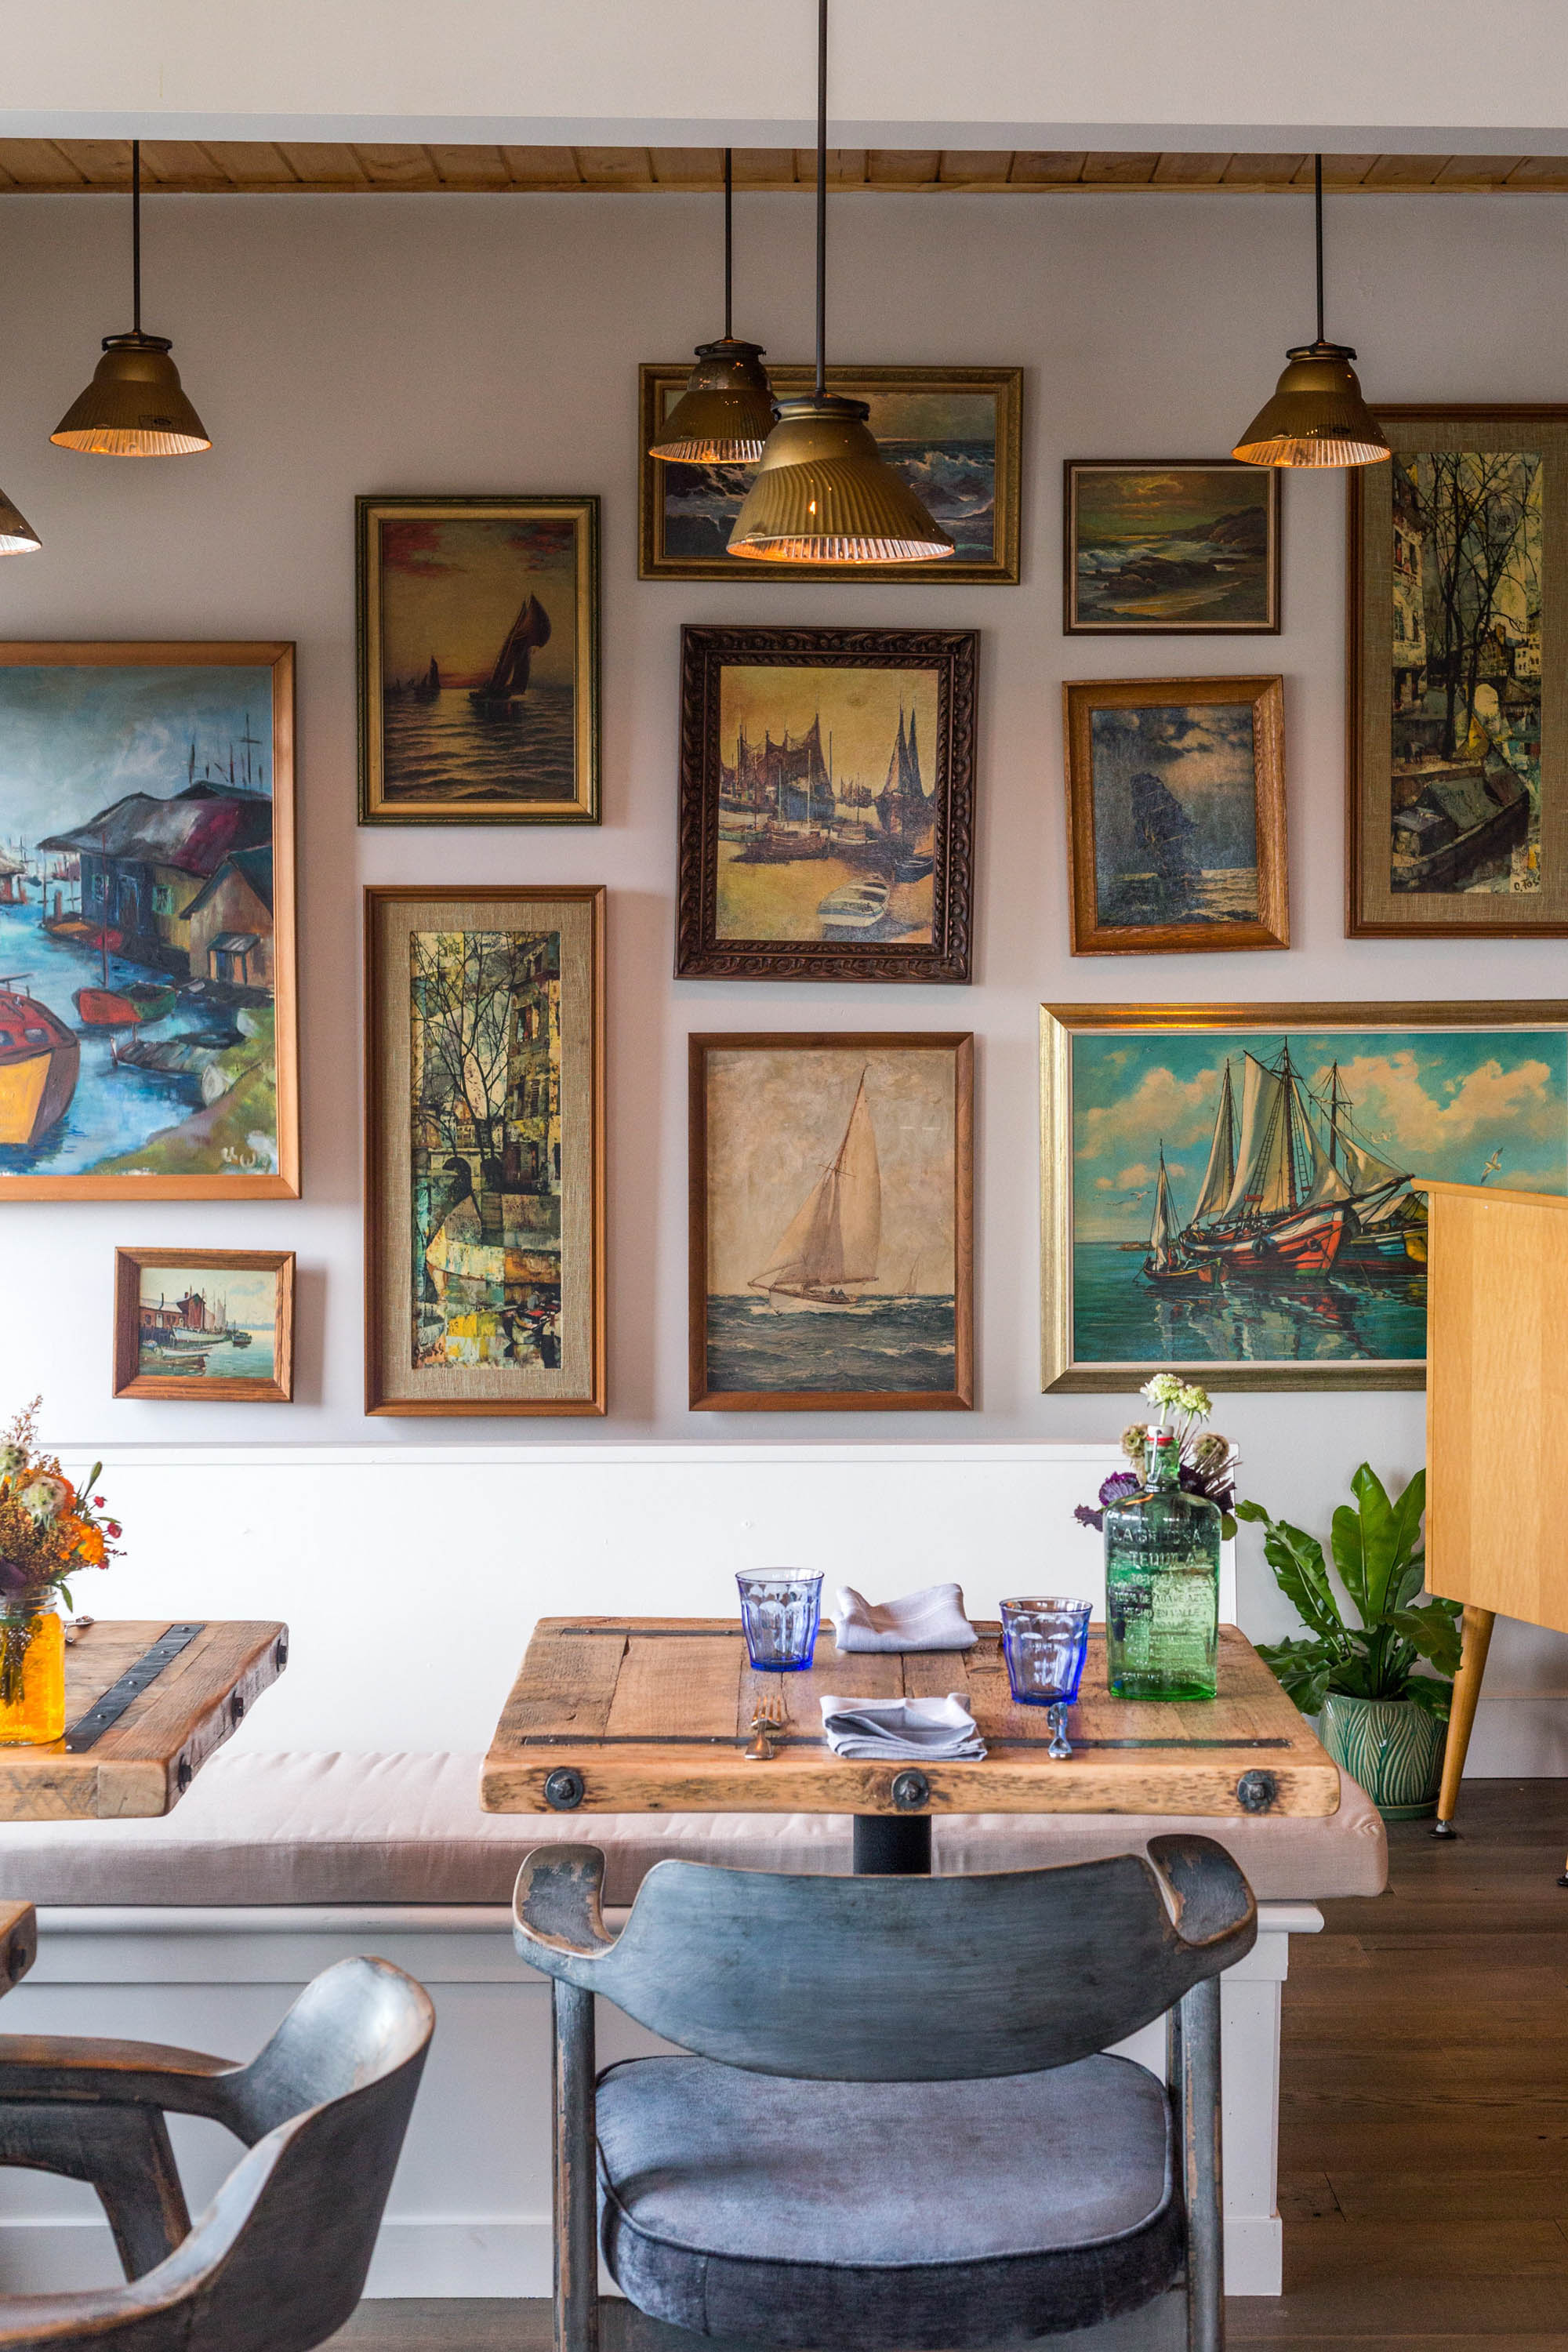 The Gallery Wall near the entrance features classic paintings capturing Alki Beach's essence. Antique gold frames and distressed pendants add warmth.